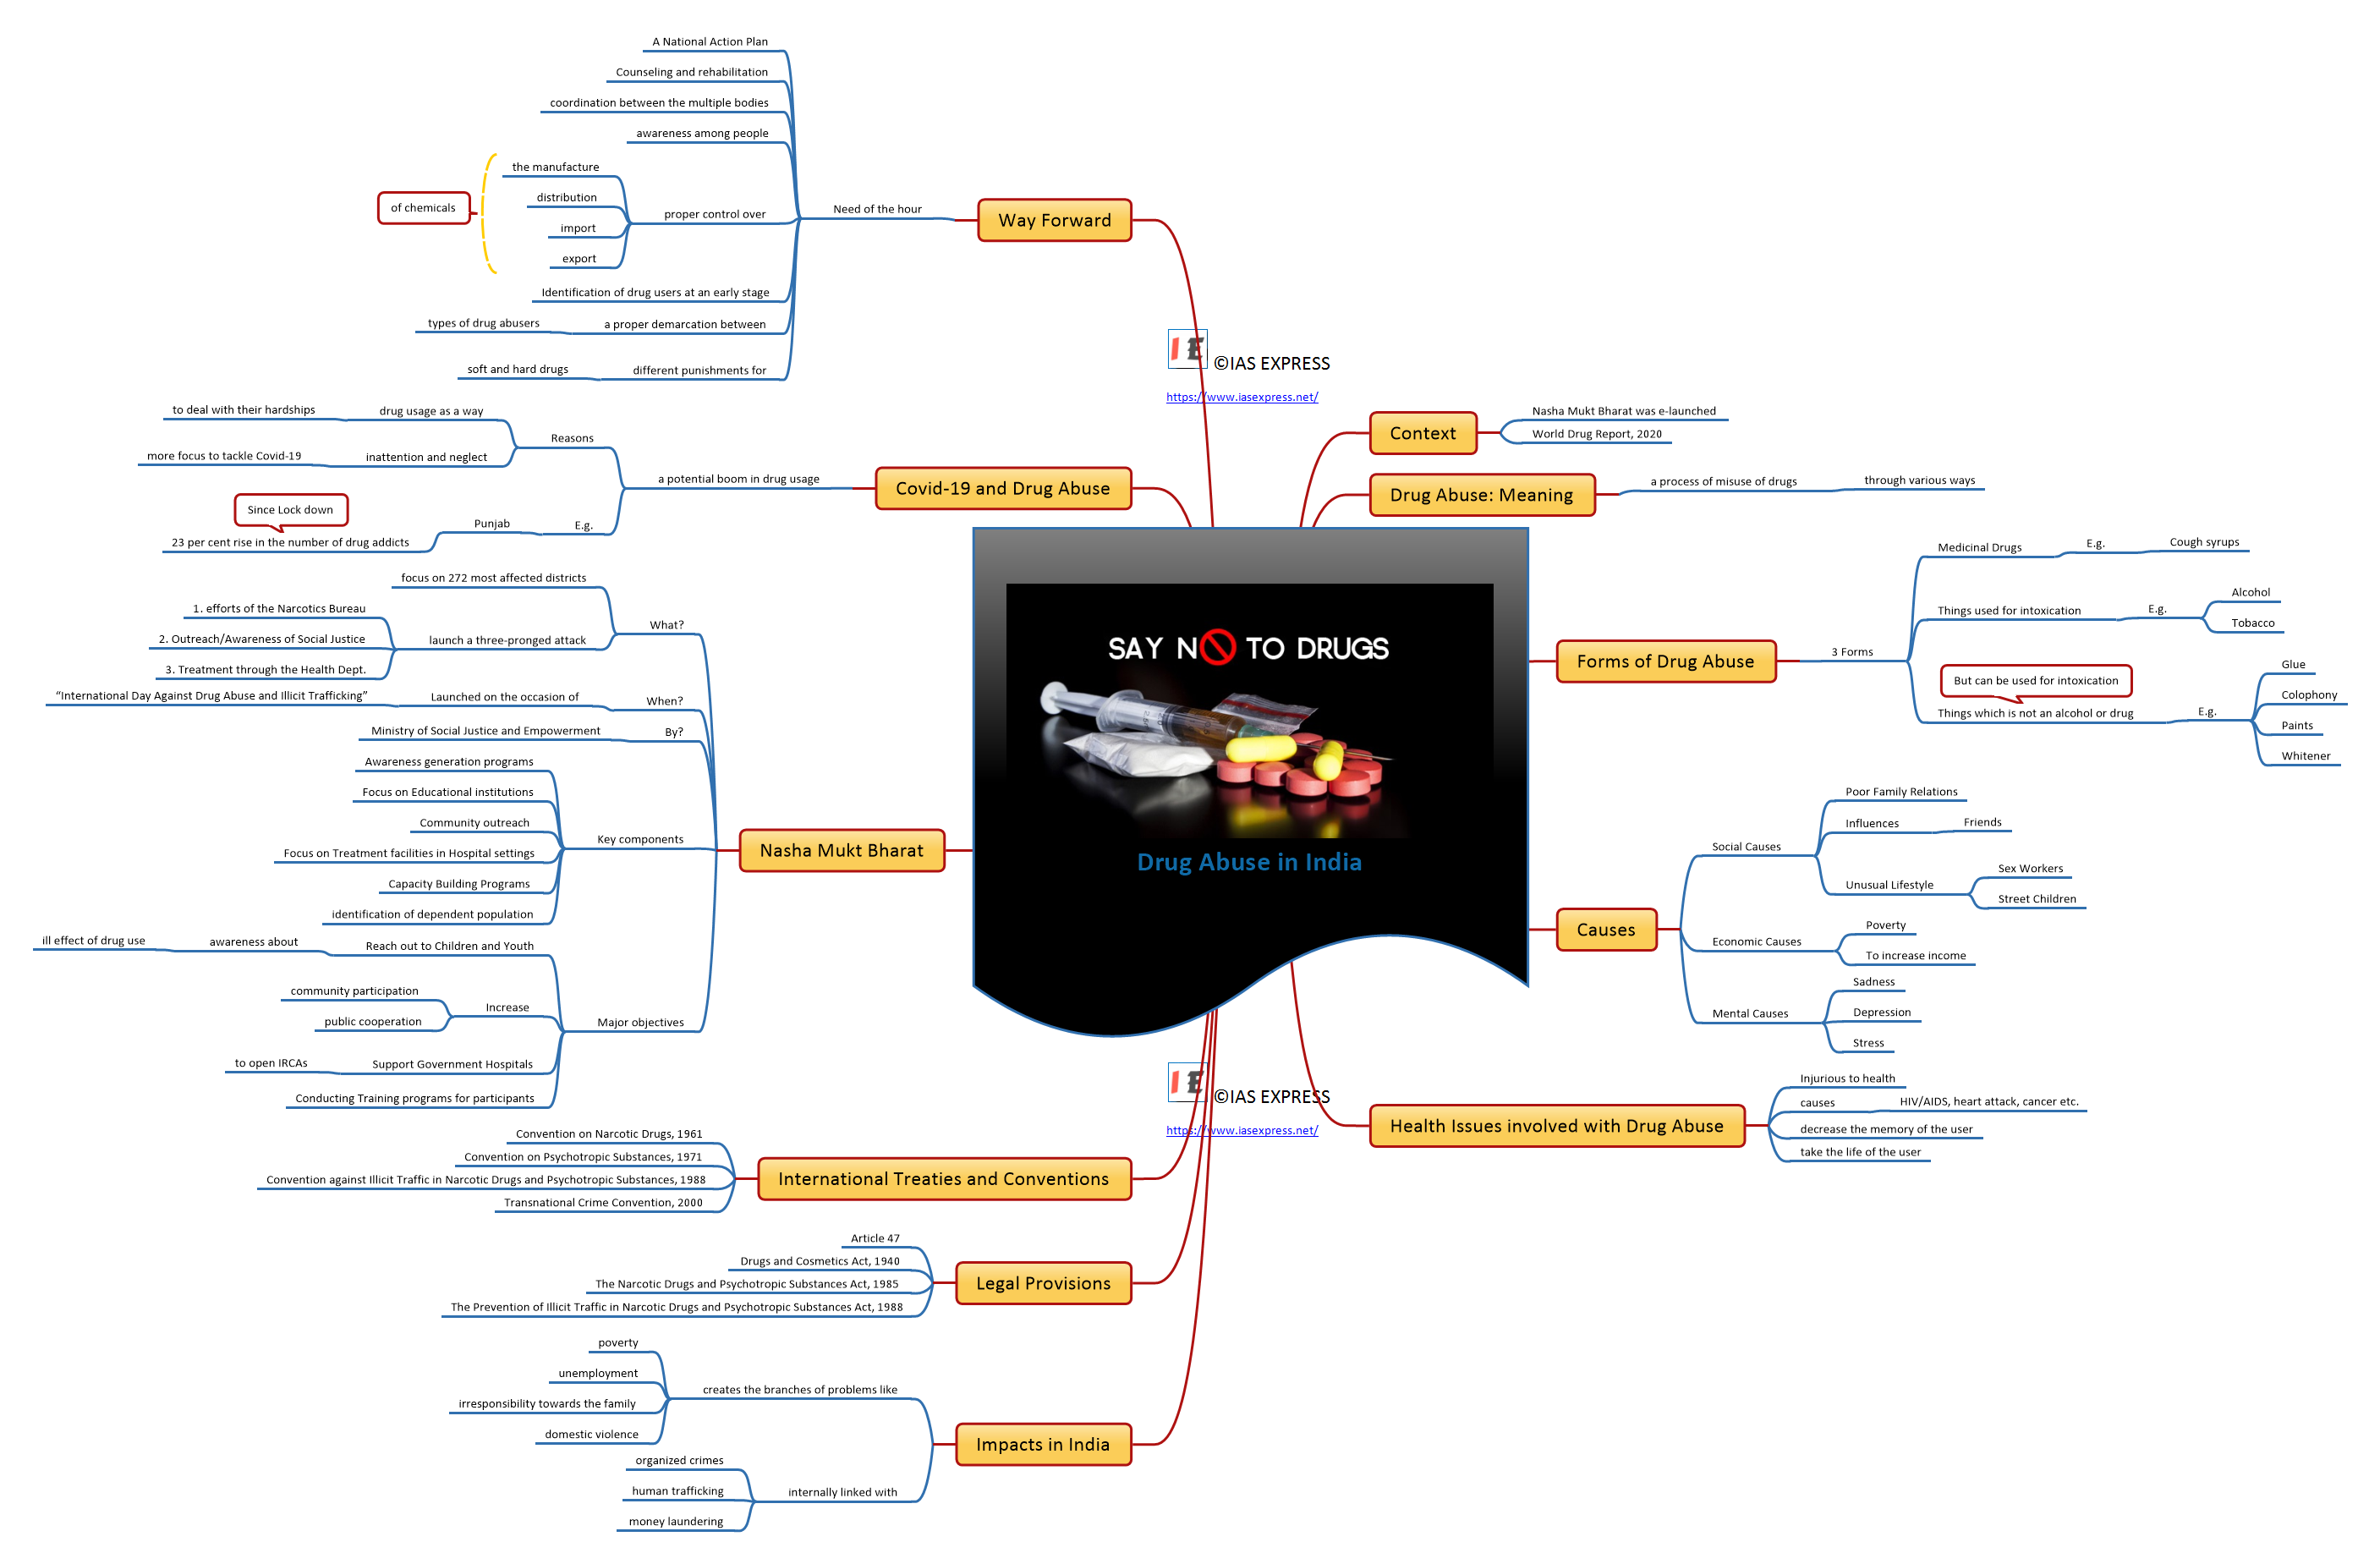 Mind map of Drug Abuse in India